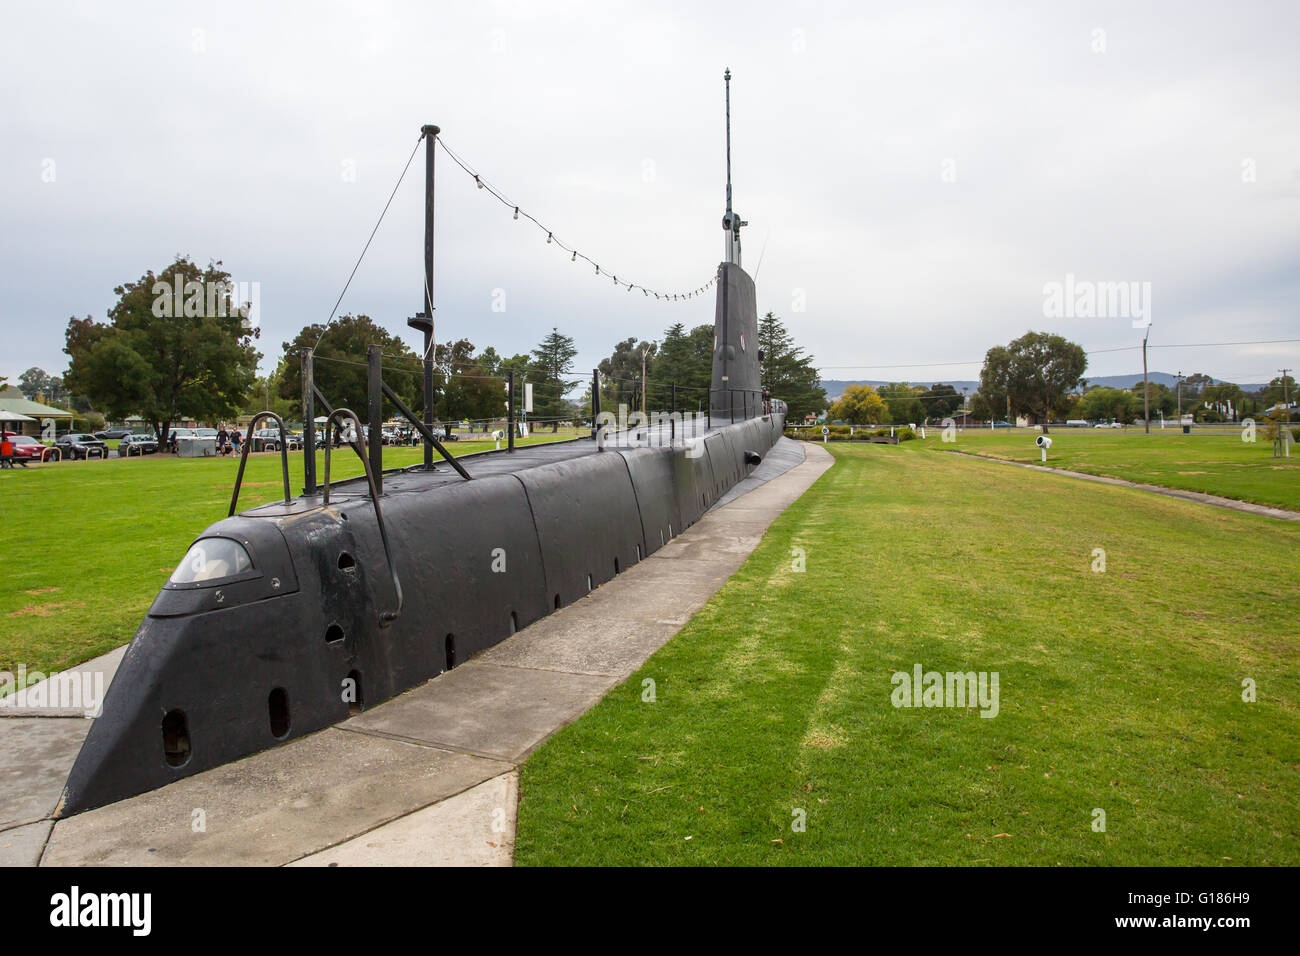 The famous landmark of HMAS Otway submarine in the rural town of Holbrook, in New South Wales, Australia. Stock Photo